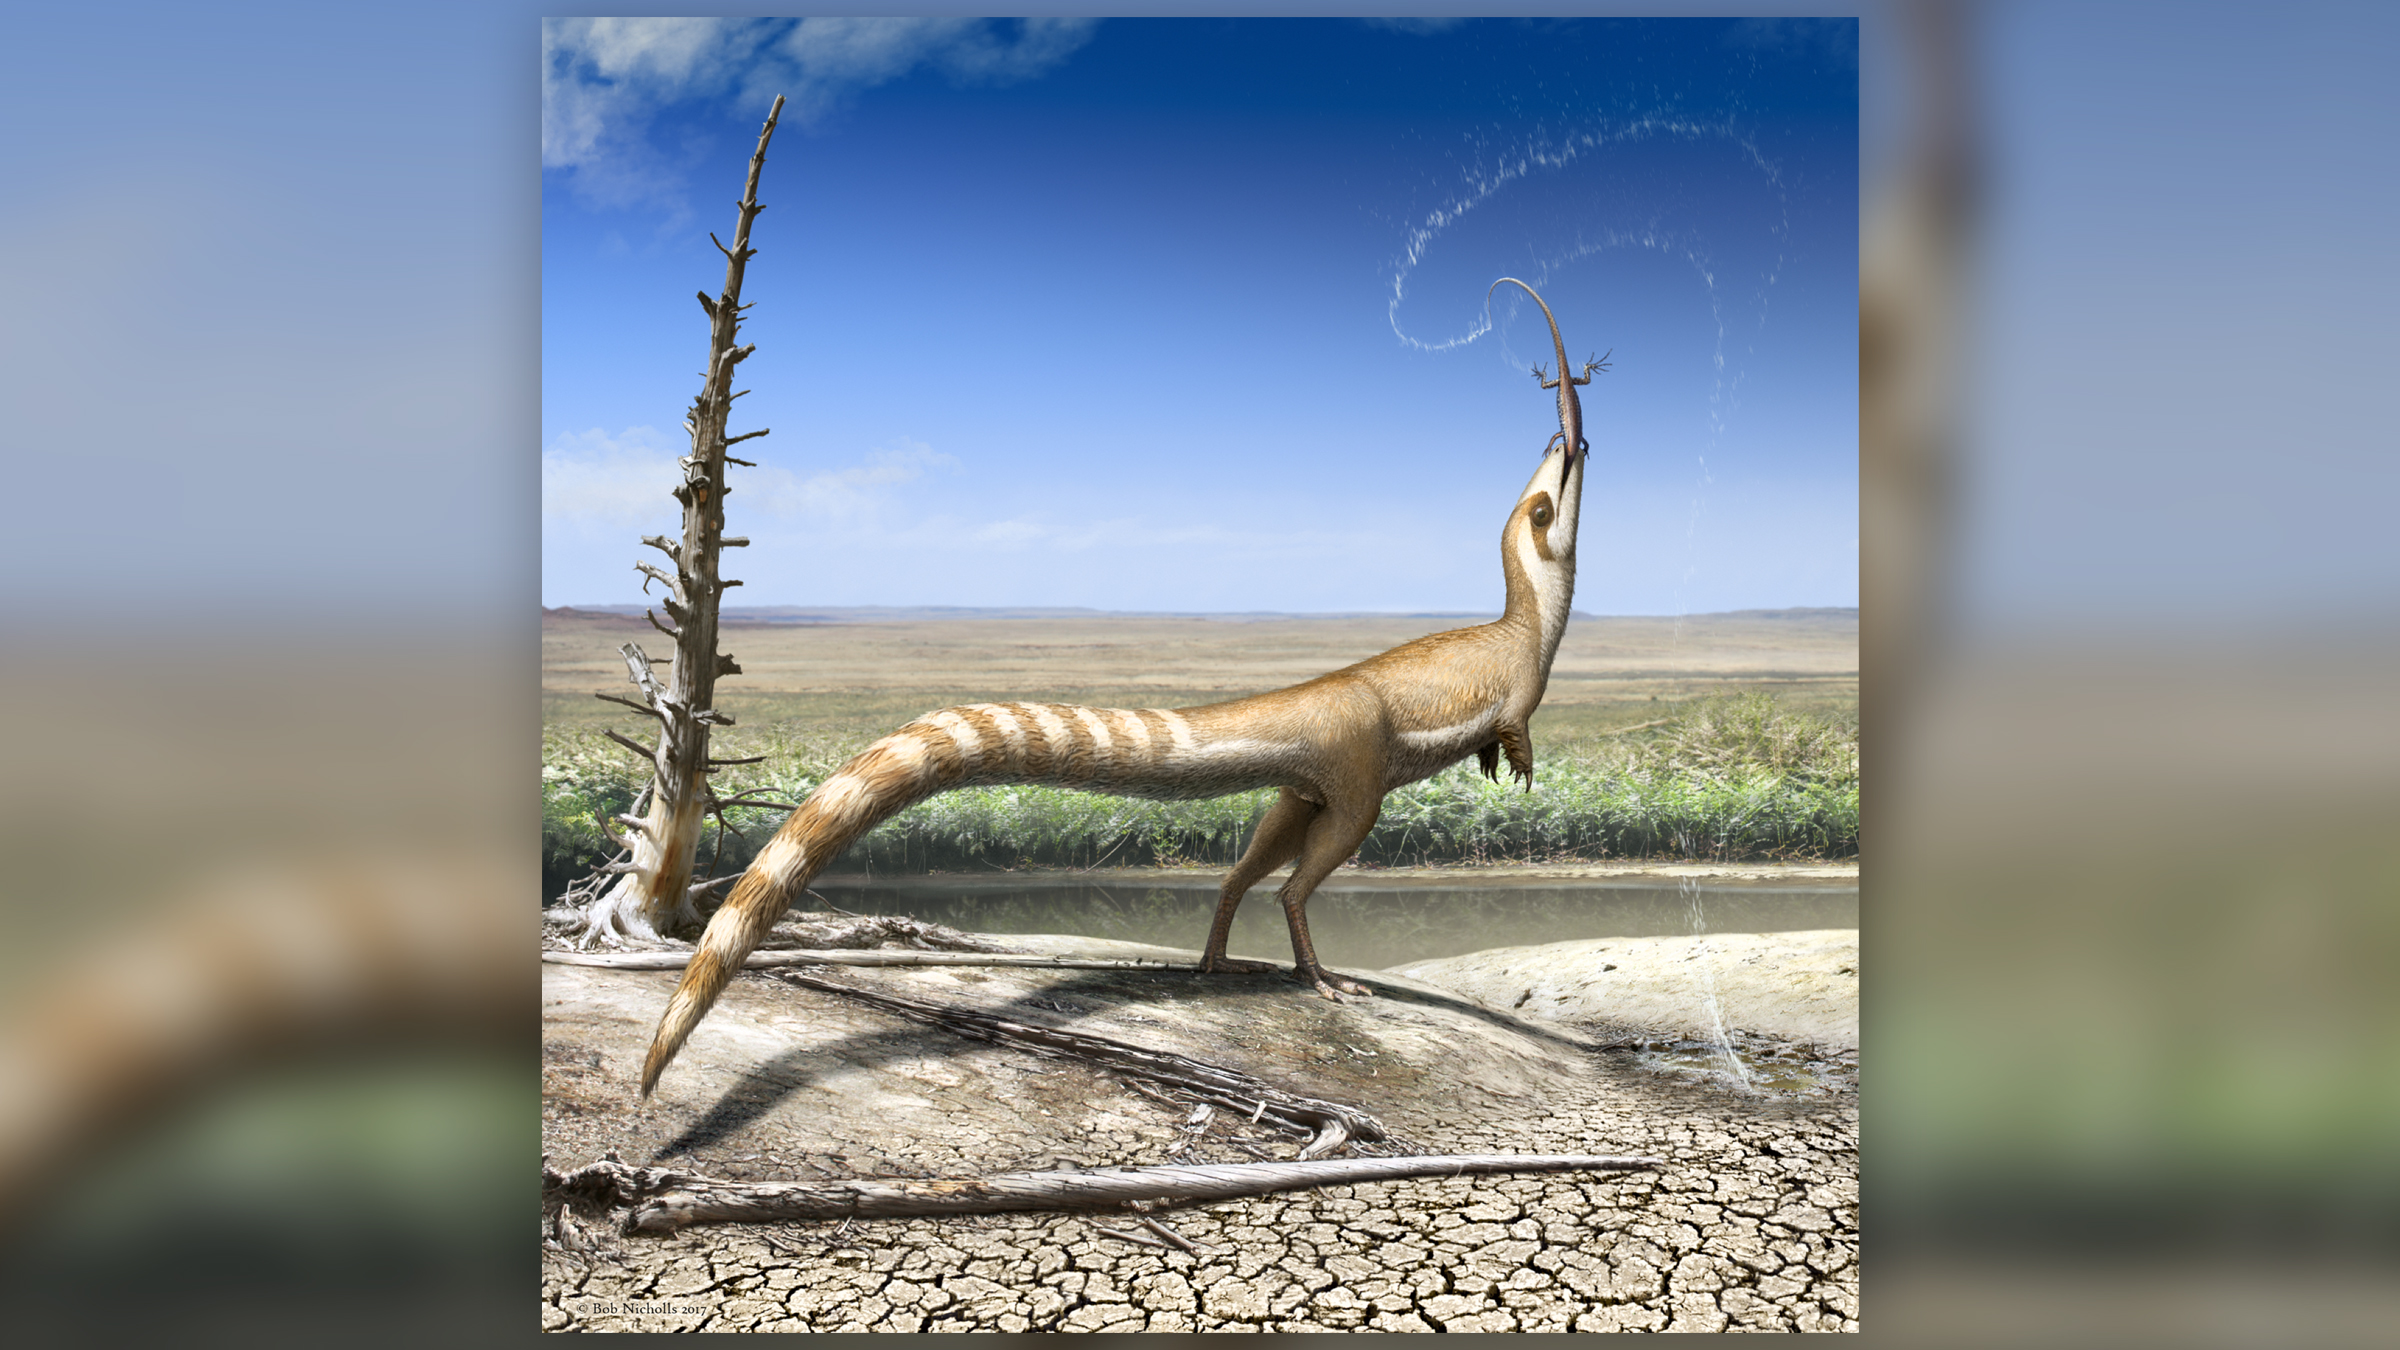 The small bipedal dinosaur Sinosauropteryx had a raccoon-like face mask and countershading when it hunted prey during the Cretaceous period.